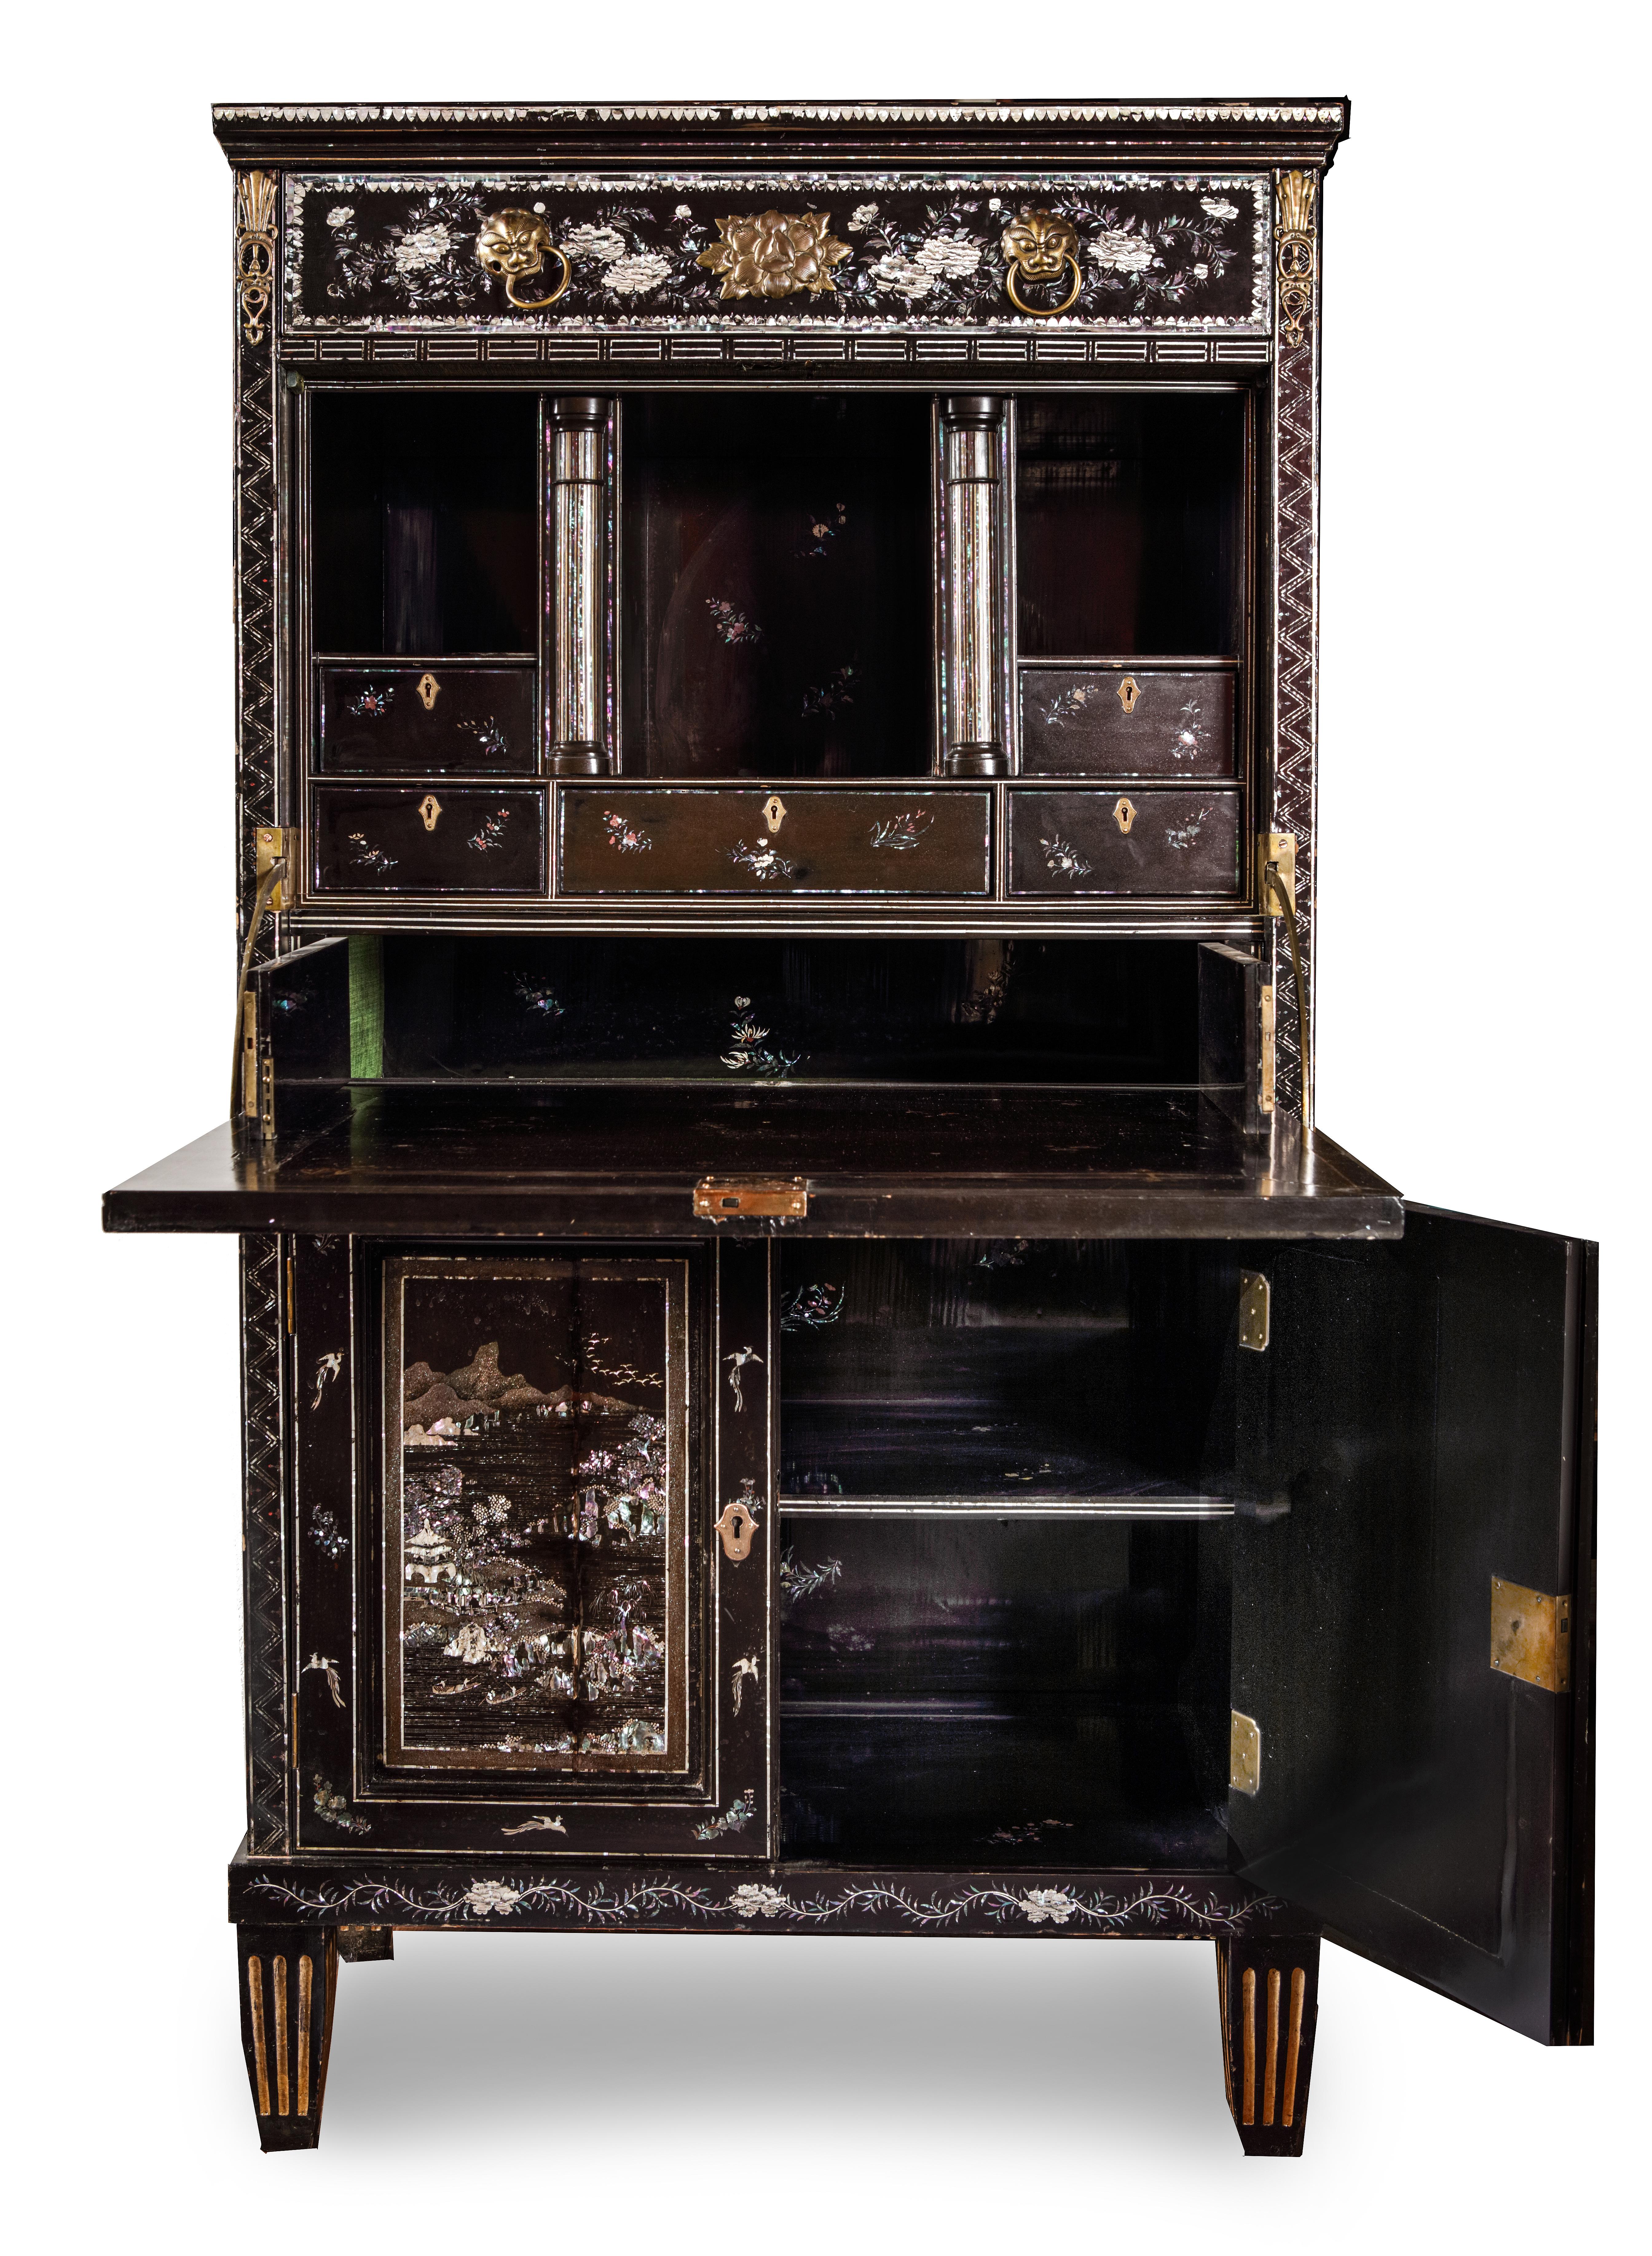 A rare Japanese export lacquered secretaire for the American market

Circa 1800-1830, Colonial

Overall densely decorated with flower sprays and landscapes, minutely inlaid with mother-of-pearl and abalone. The lacquer with a deep black gloss.